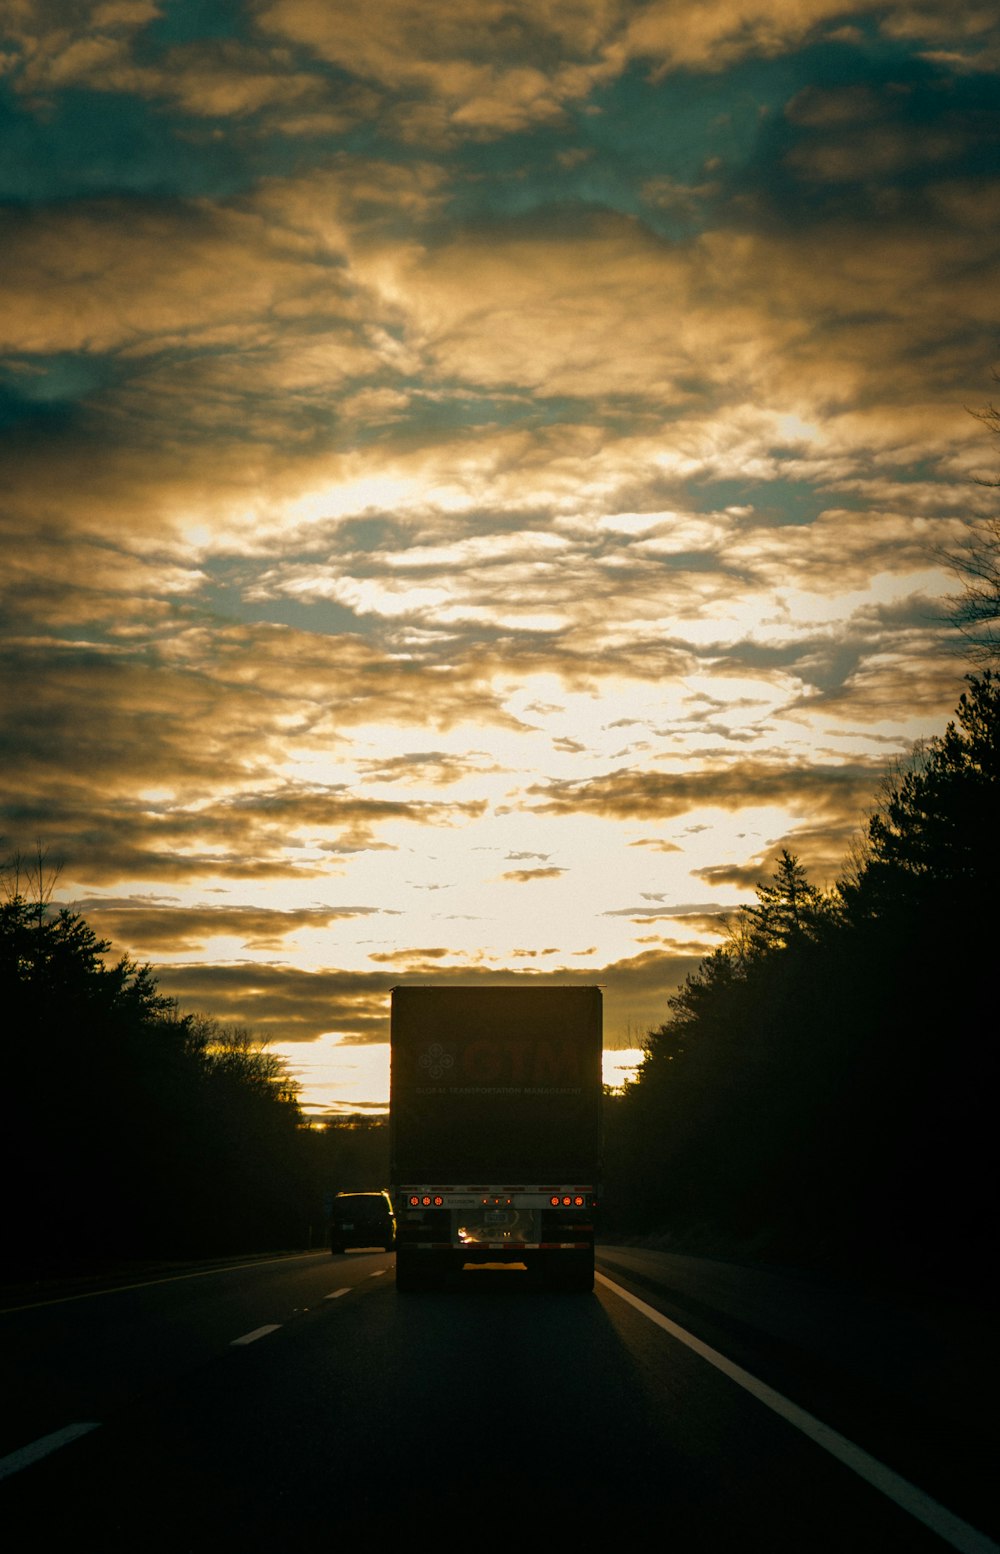 a truck driving down a road under a cloudy sky